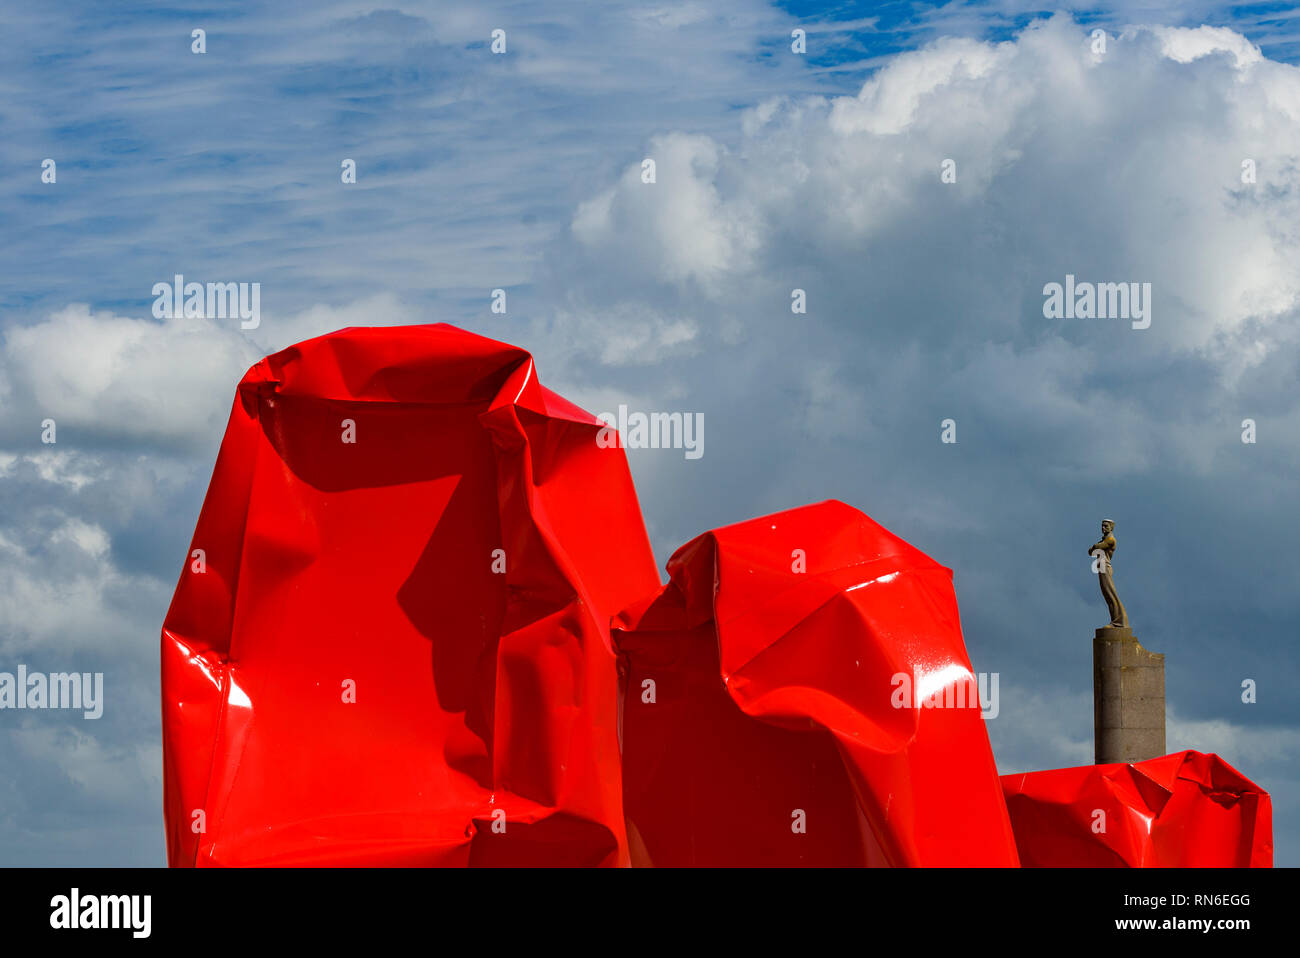 The Monument to Sailors on Zeeheldenplein Square and the Rock Strangers by Arne Quinze. Controversial modern art work on the dam of Ostend. Belgium Stock Photo